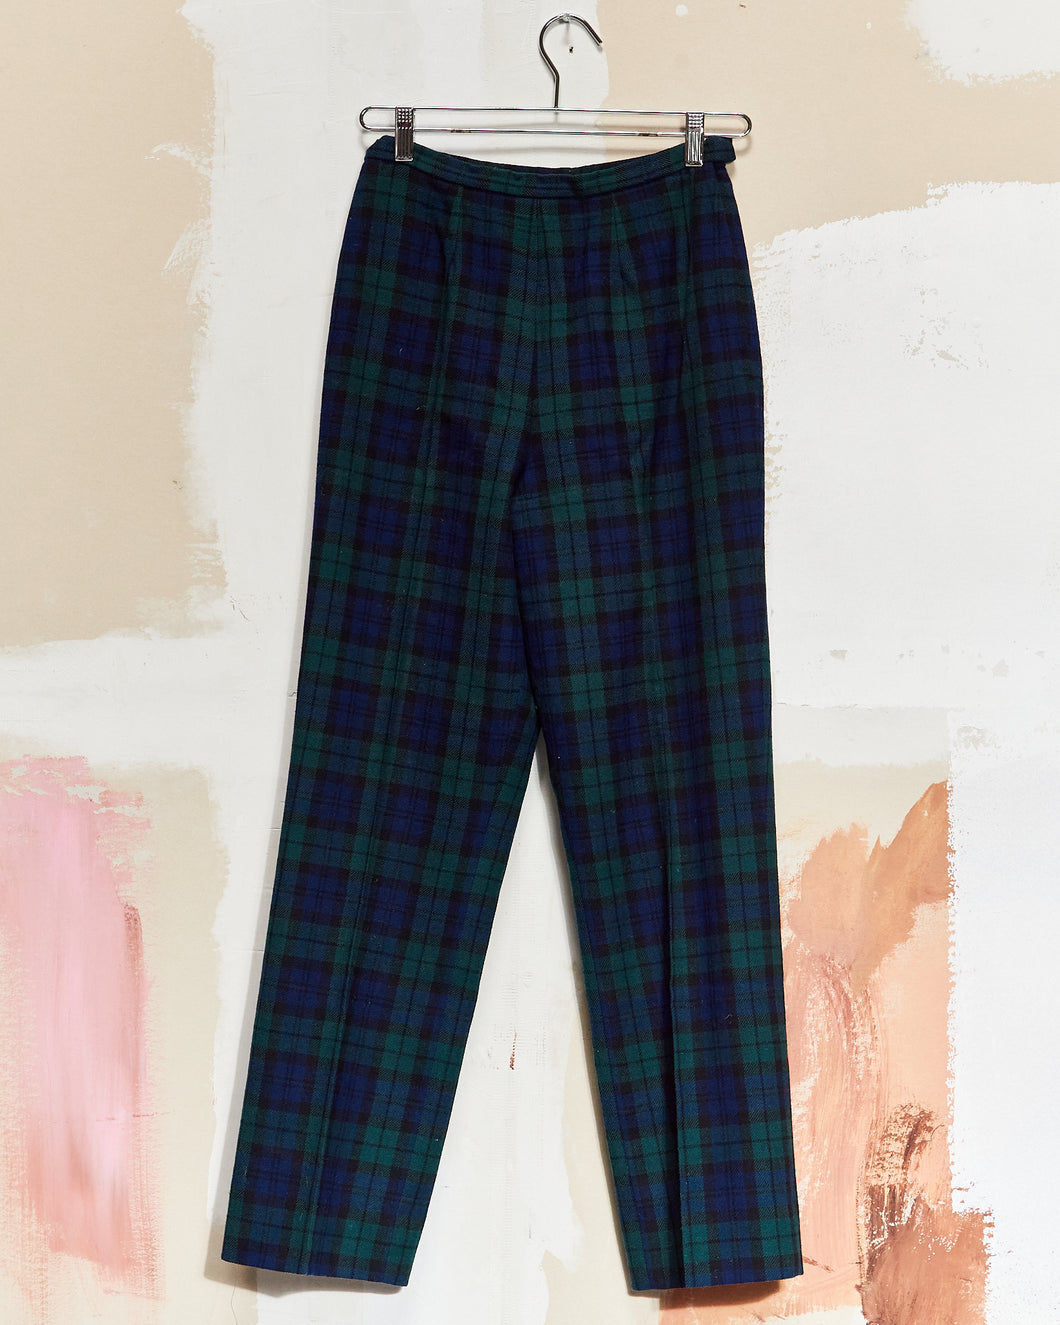 1960s High Rise Pendleton Wool Trousers 25x29